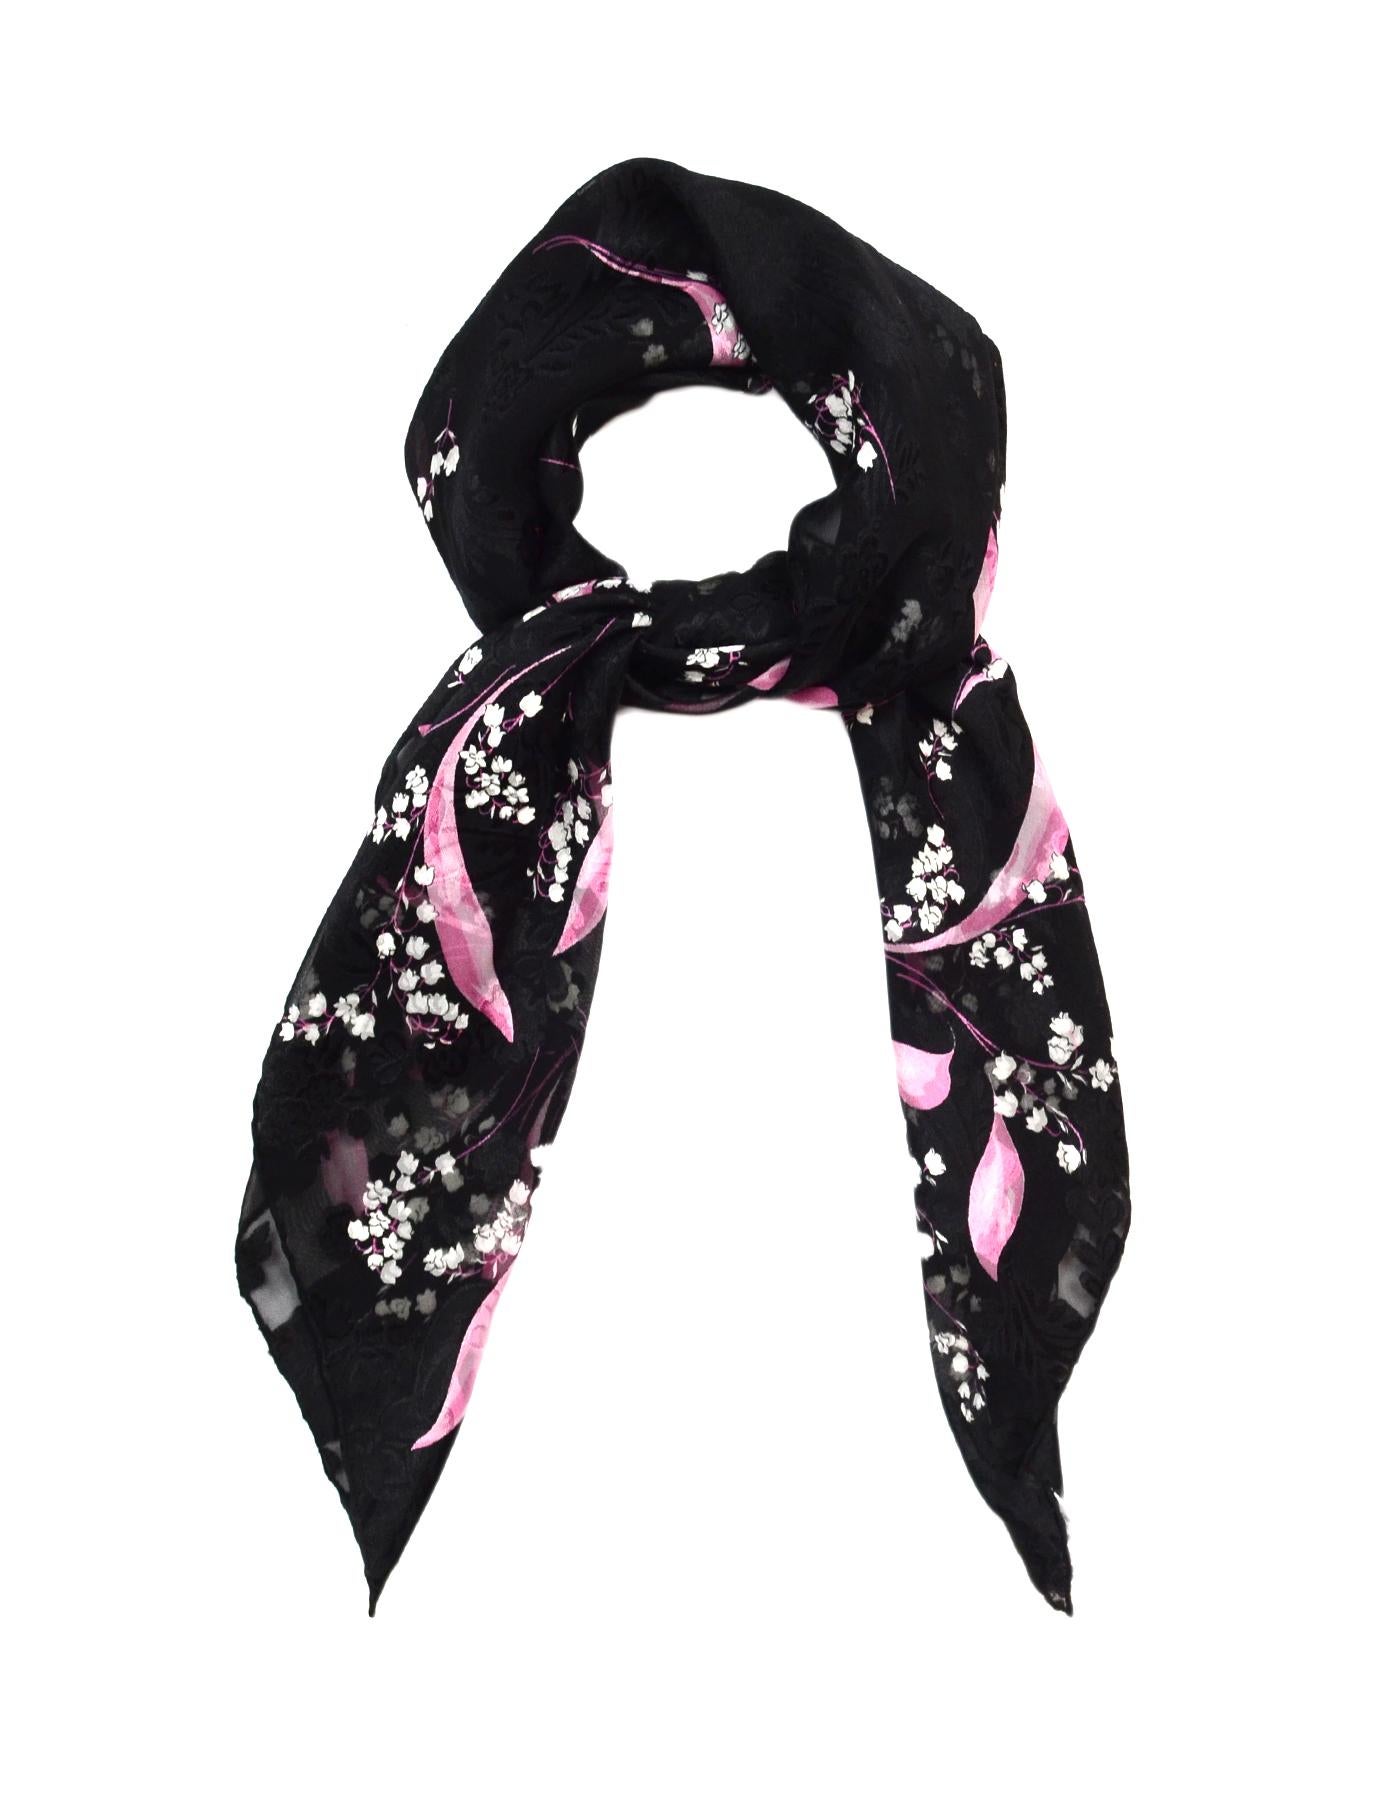 Christian Dior Black/Pink Silk Floral Scarf

Made In:  Italy
Color: Black, pink, white
Materials: 100% silk
Overall Condition: Excellent pre-owned condition 

Measurements: 
32